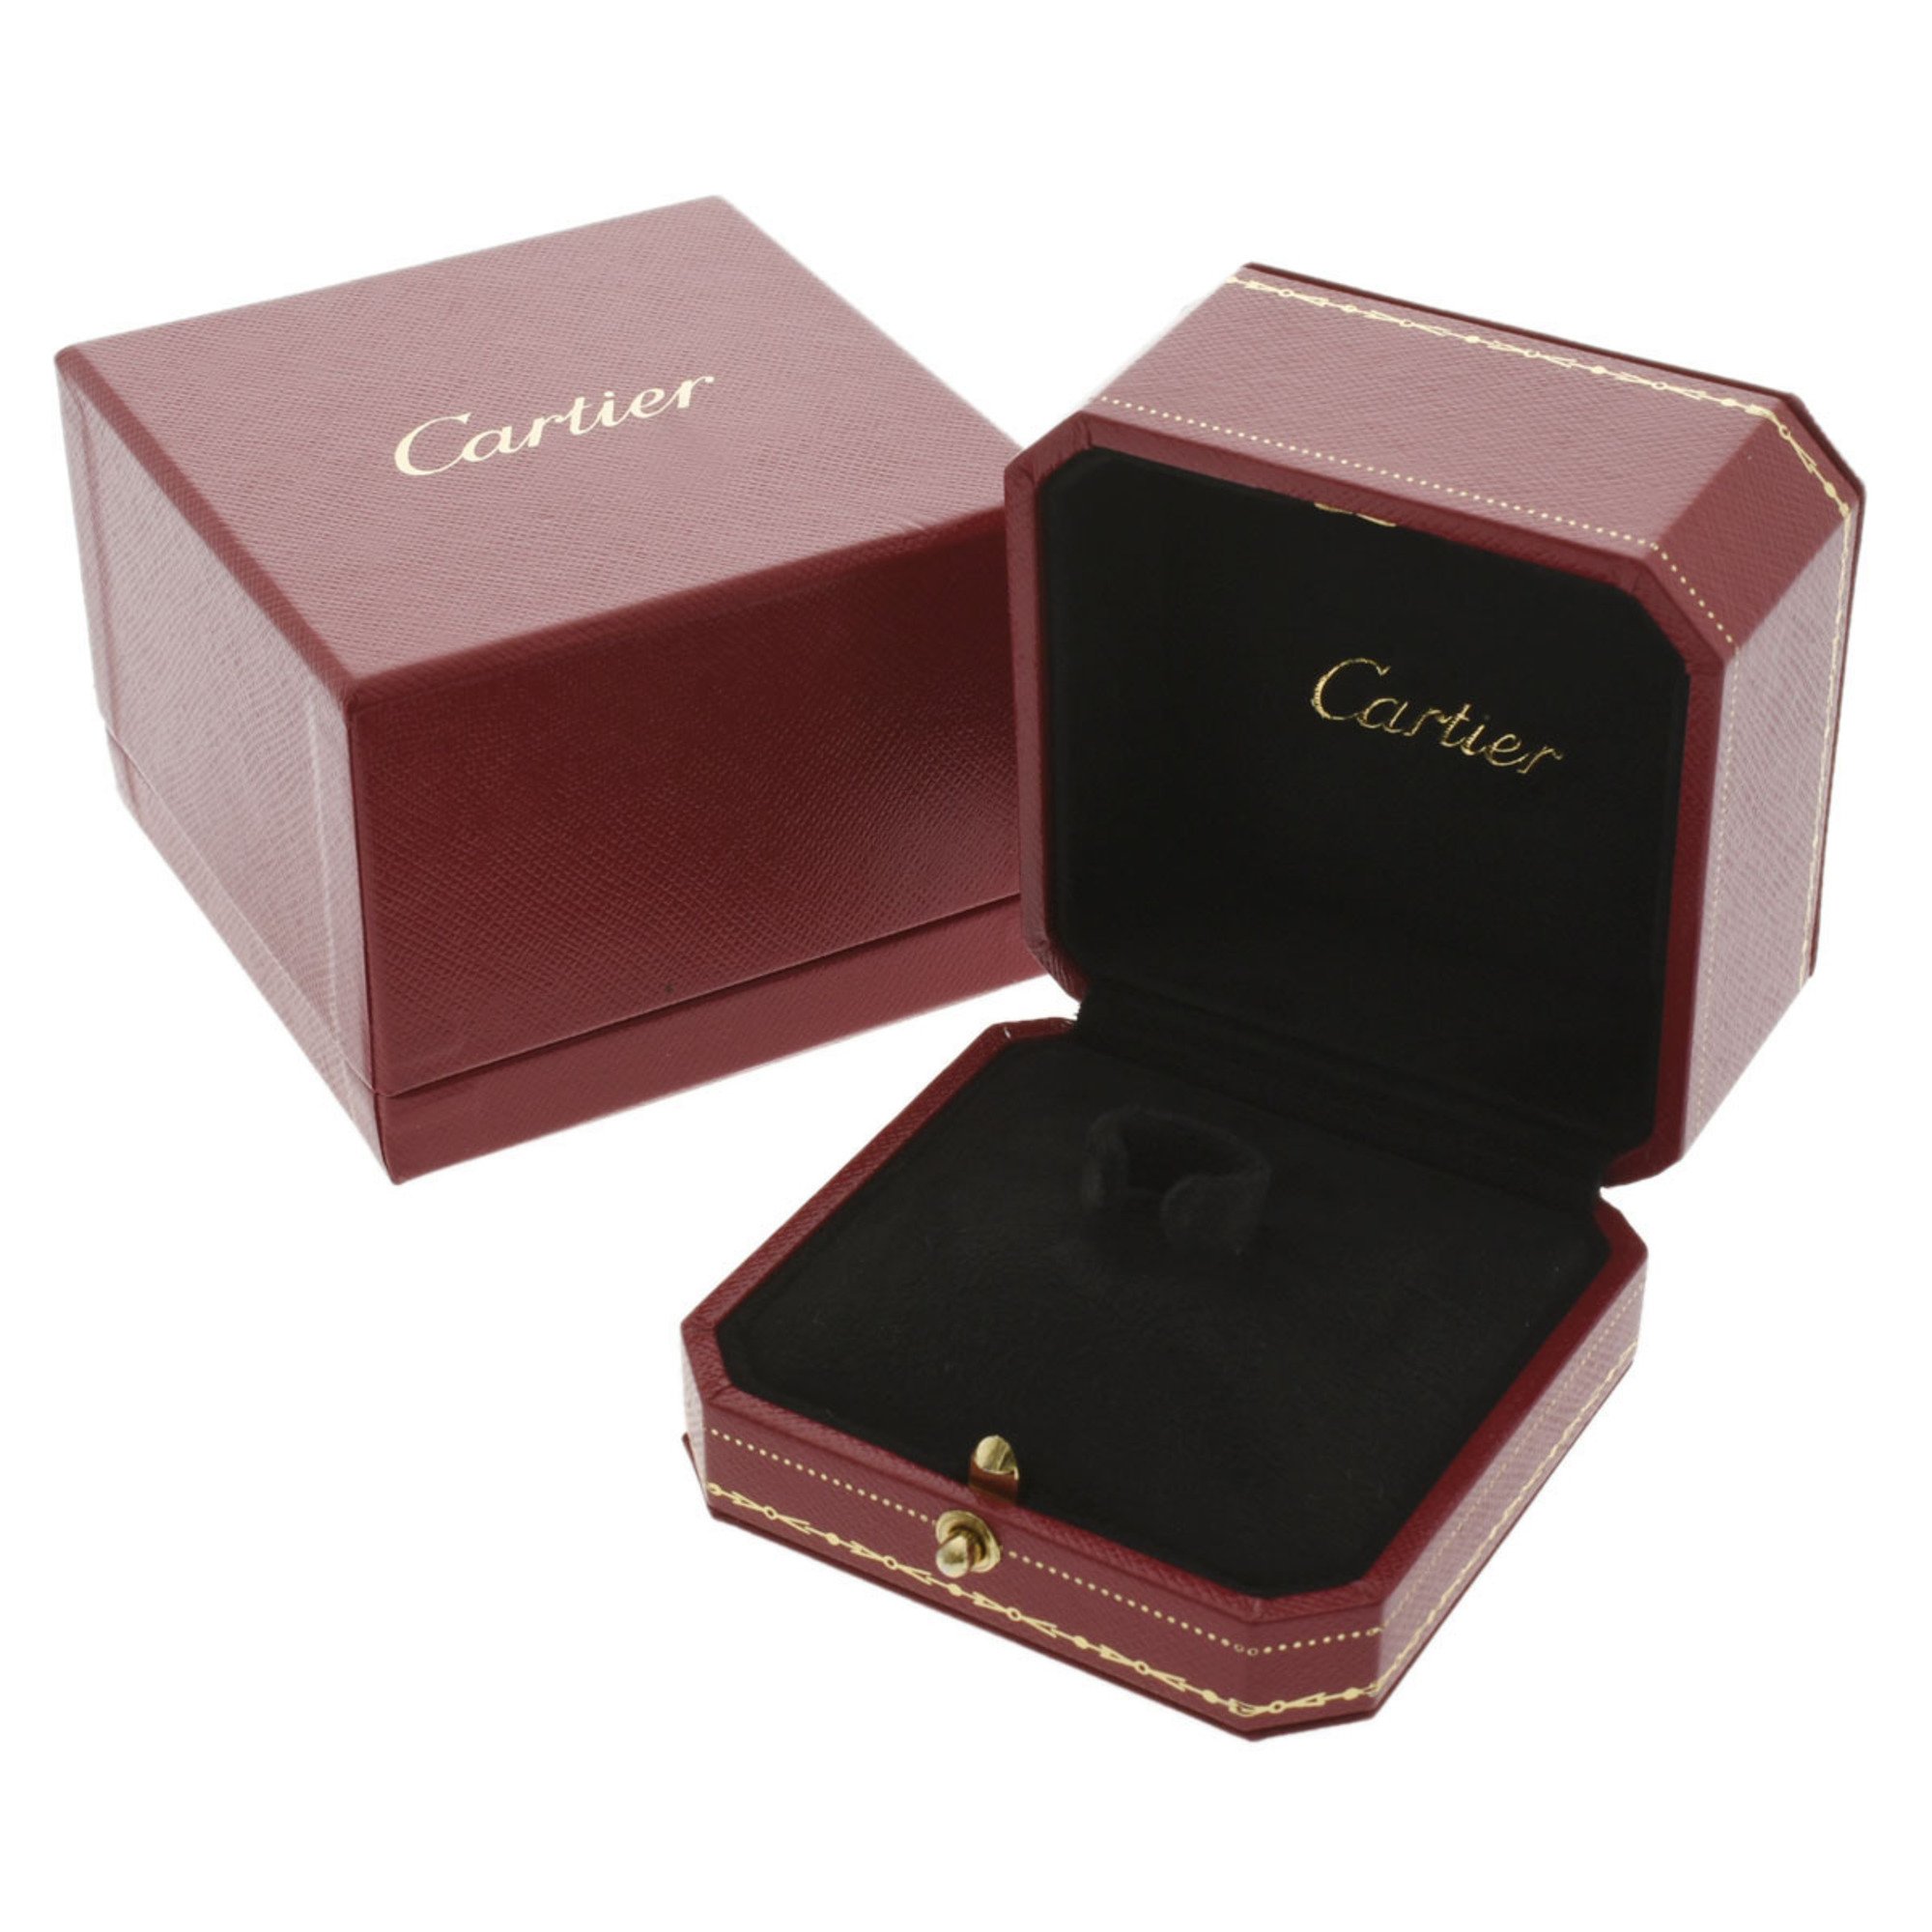 CARTIER 2C Diamond 2000 Limited Edition #51 - Size 11 Ladies K18 White Gold Ring